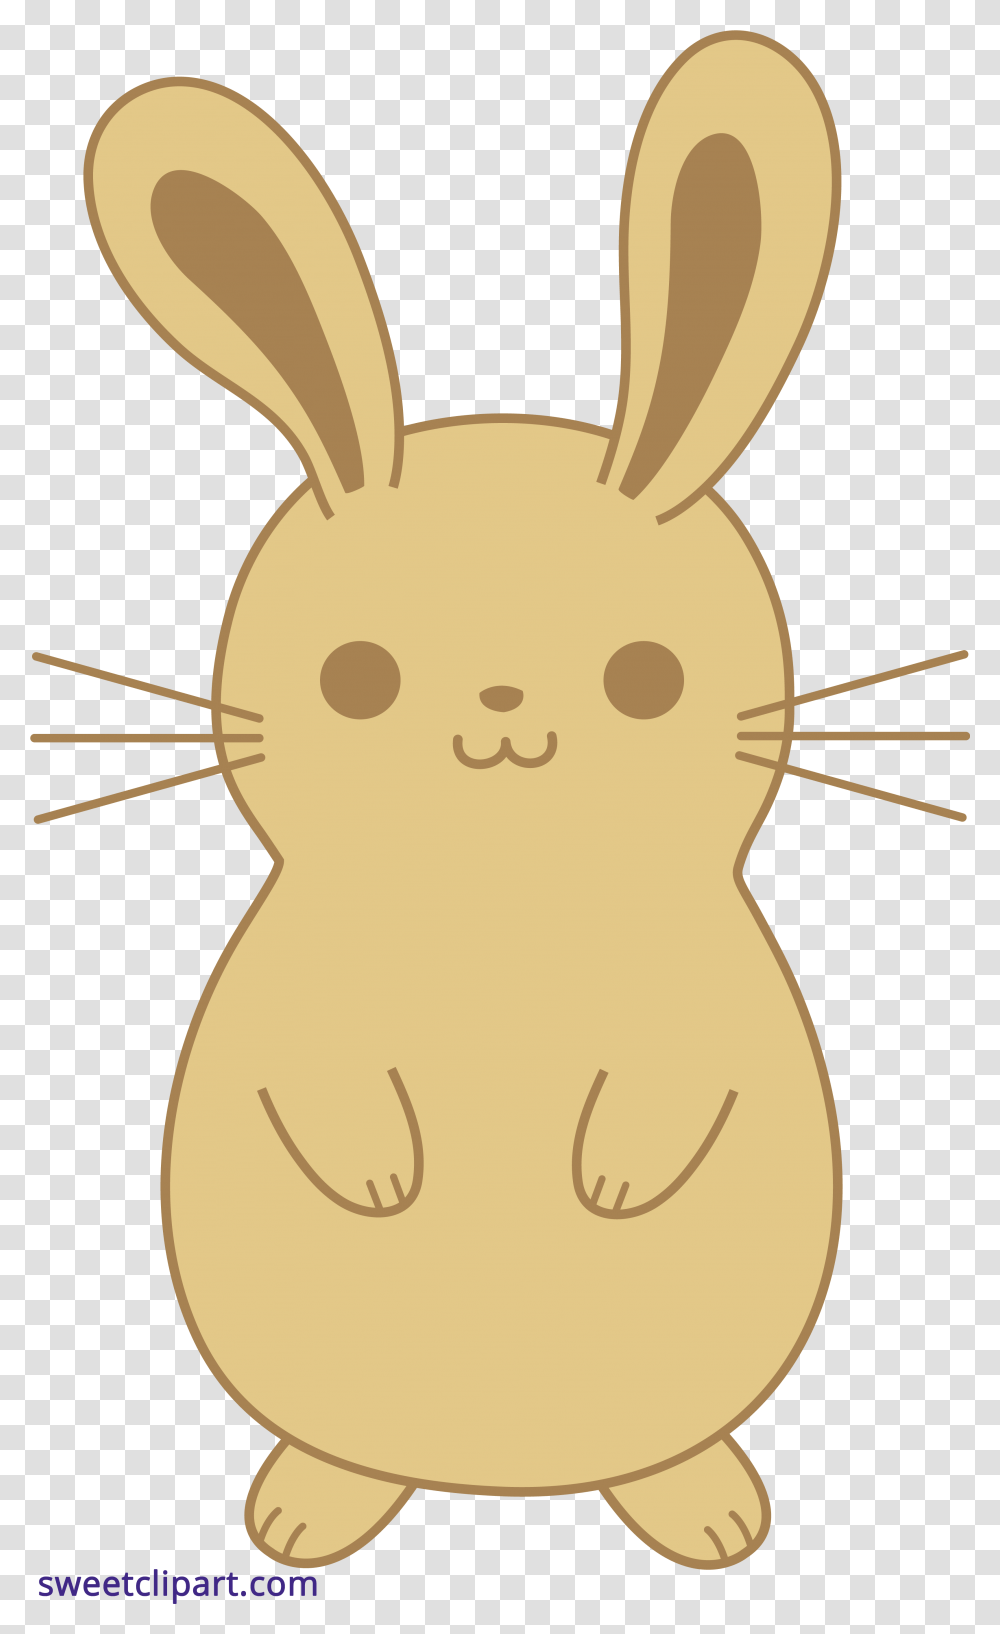 Jpg Black And White Bunnies Clipart Simple Cartoon Bunny, Mammal, Animal, Rodent, Rabbit Transparent Png